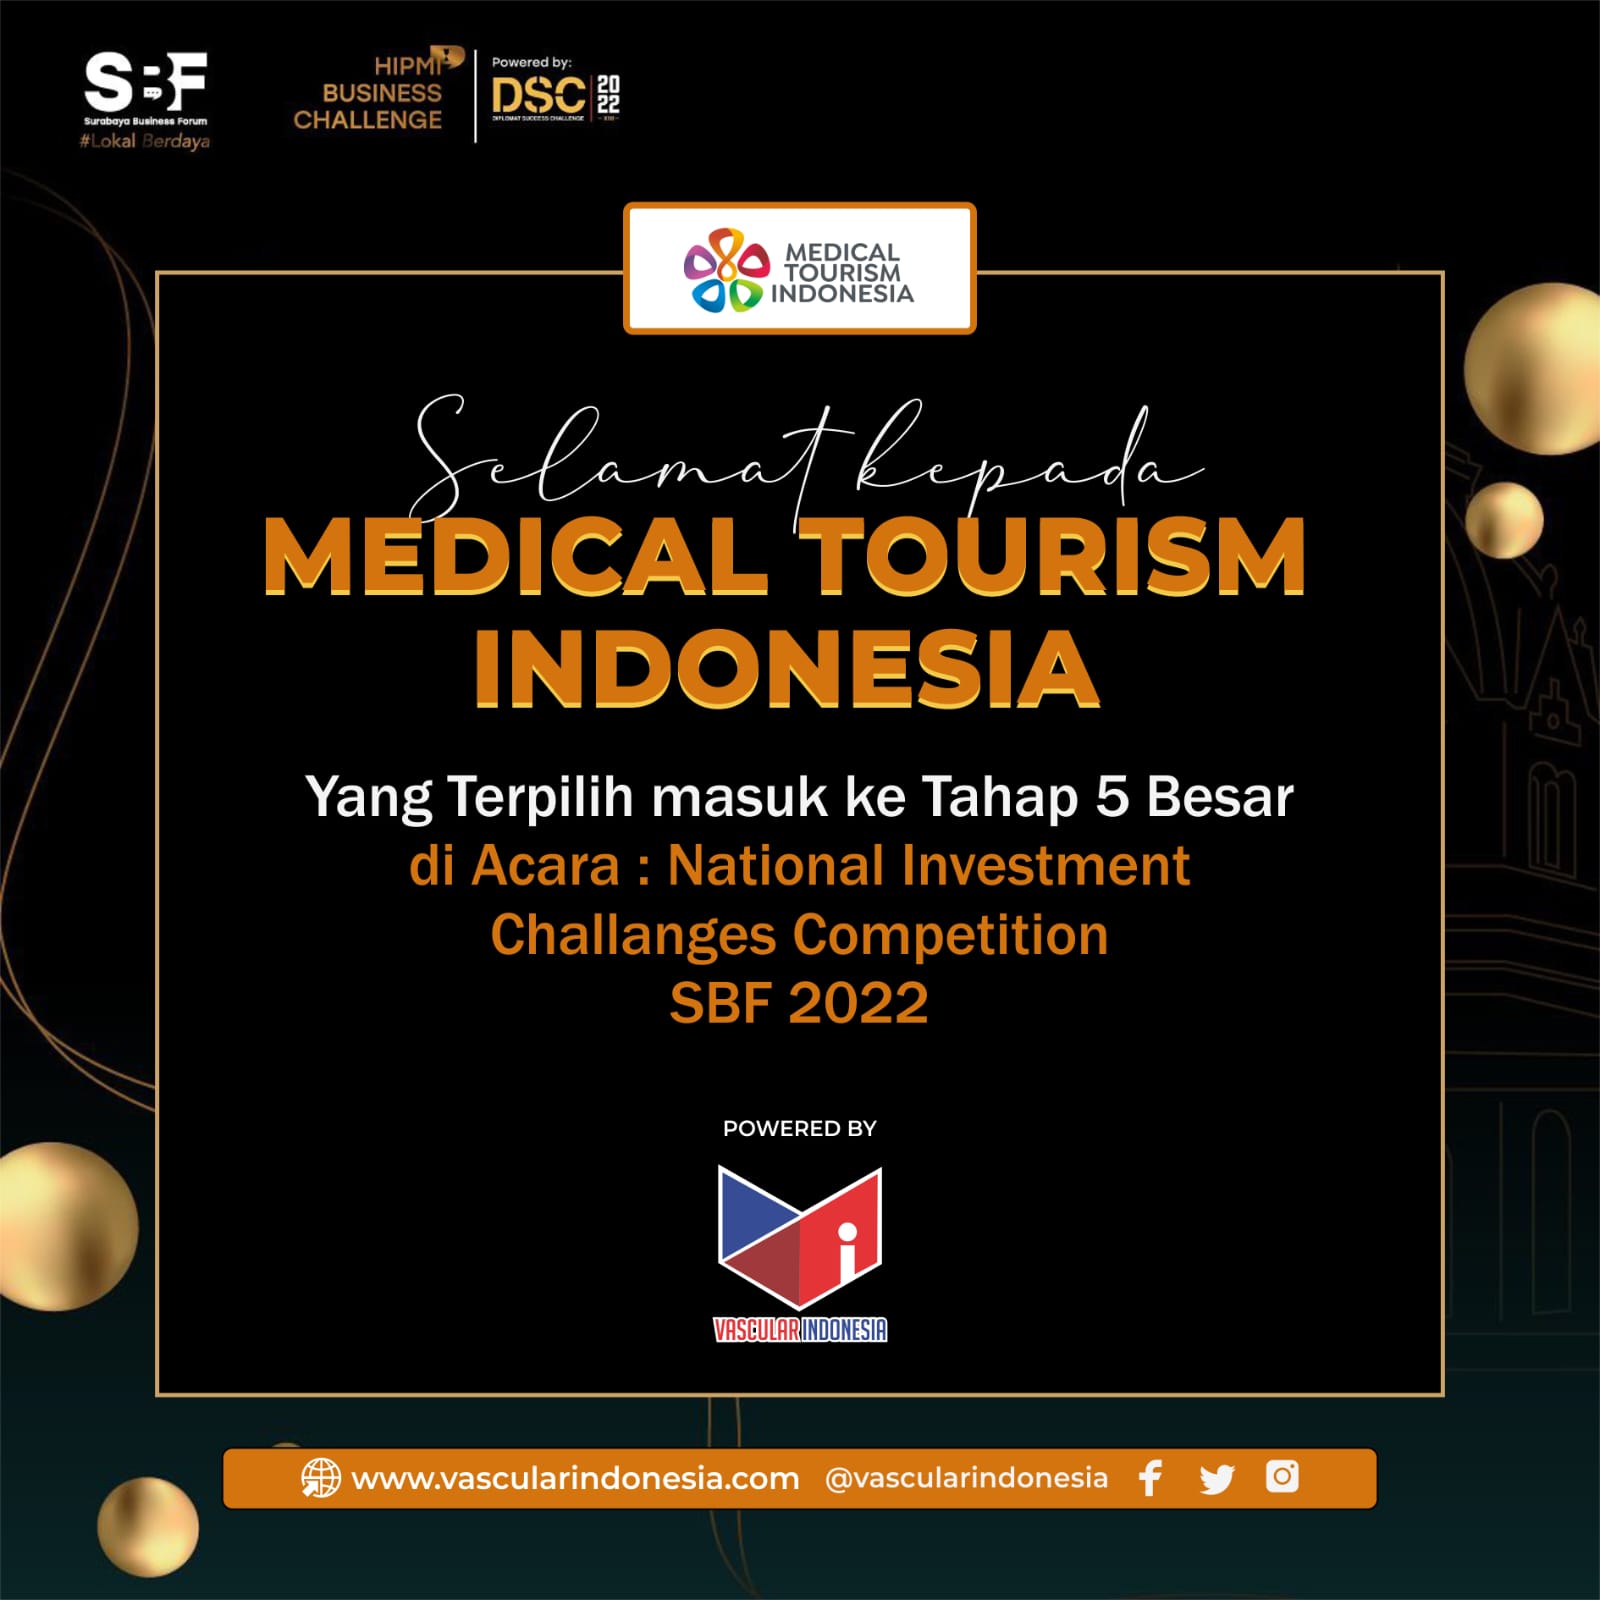 Medical Tourism Indonesia run Investment appraisals, May 21th